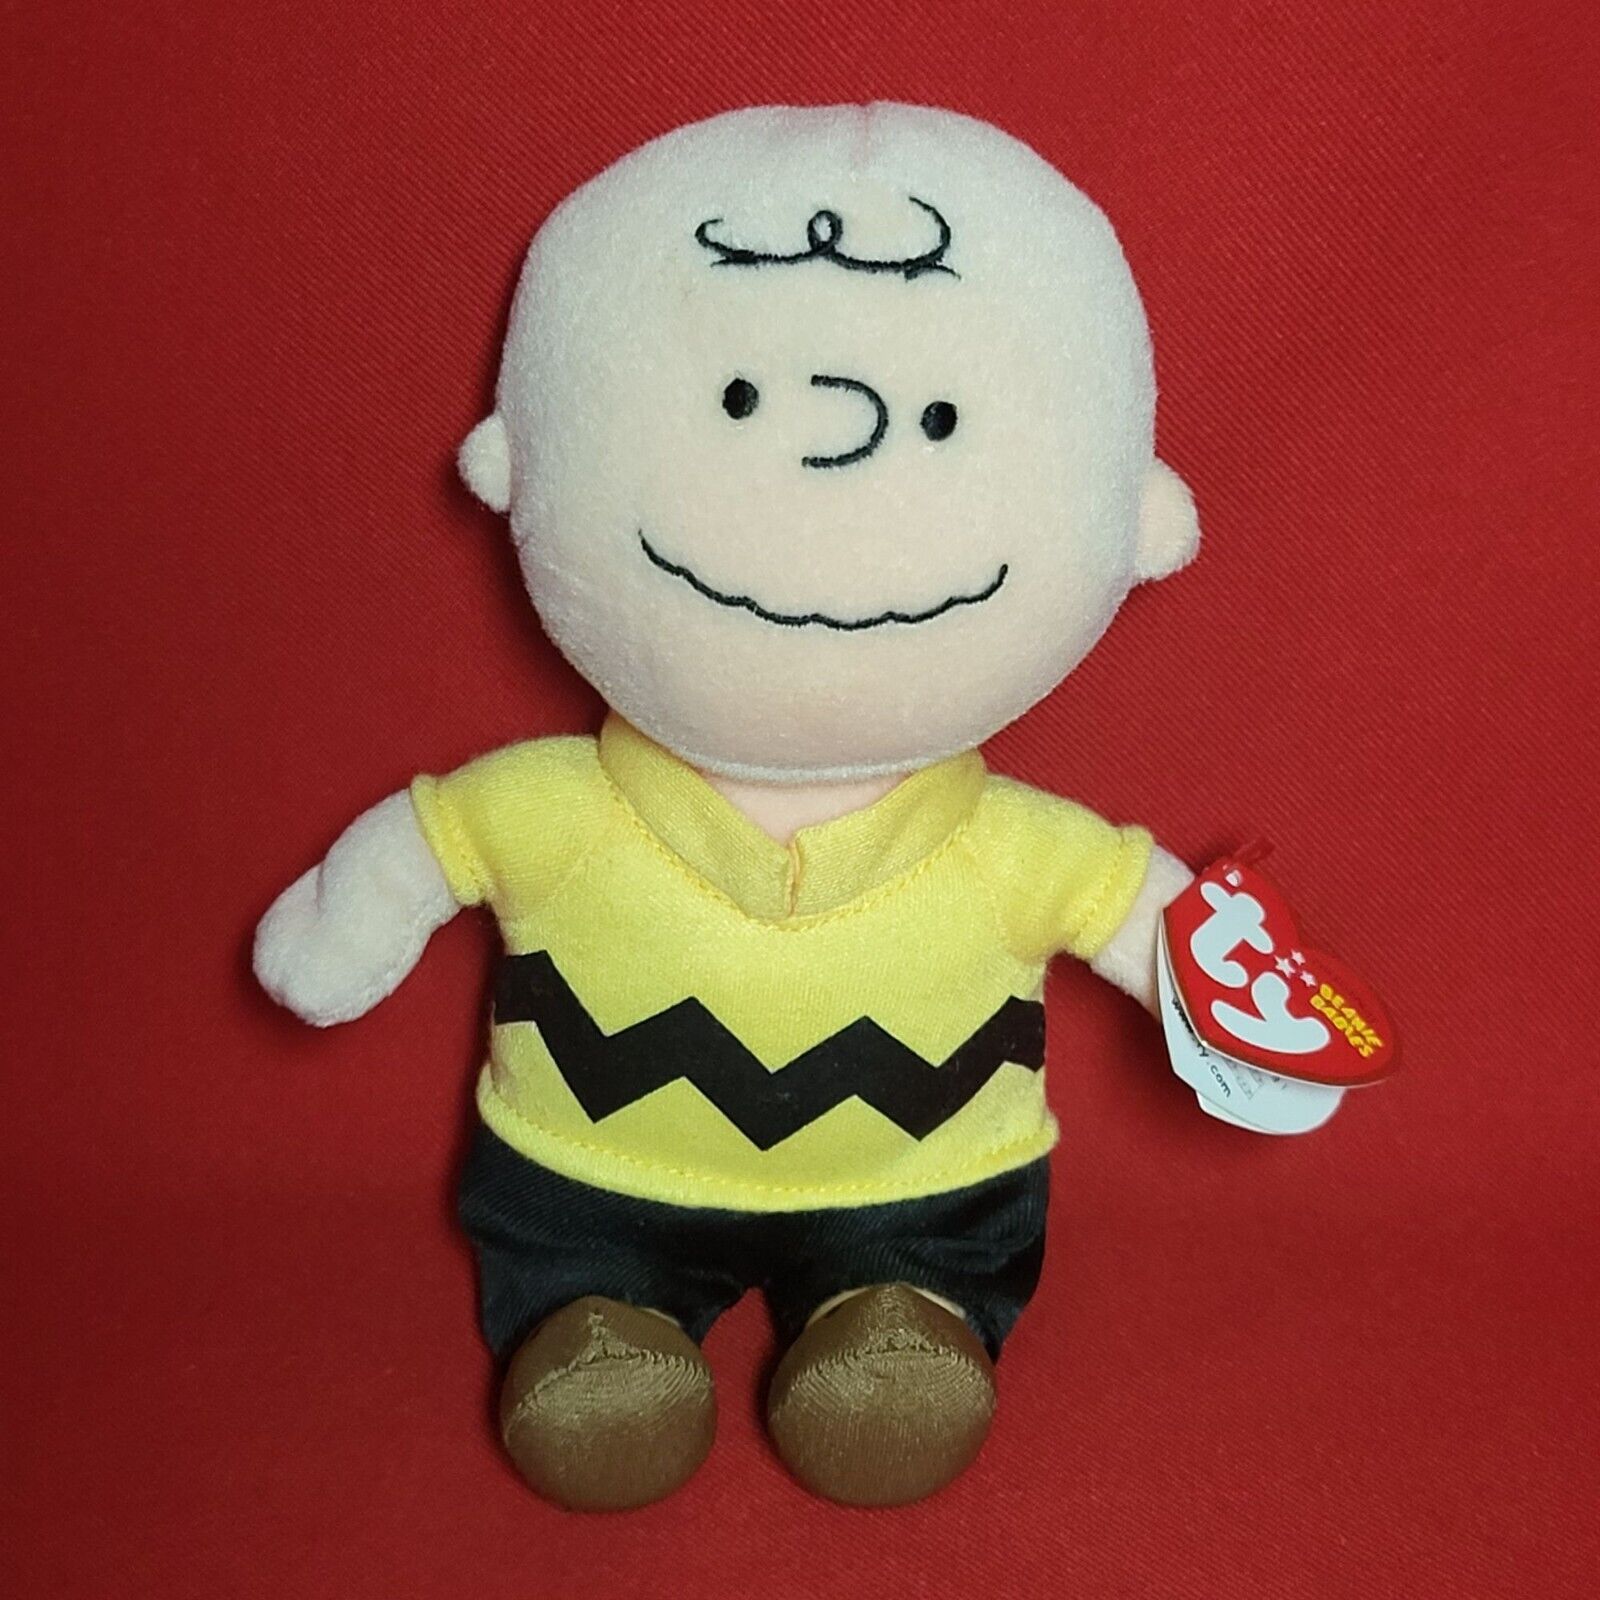 Peanuts Charlie Brown Plush Doll Stuffed Soft TY Beanie Baby Toy